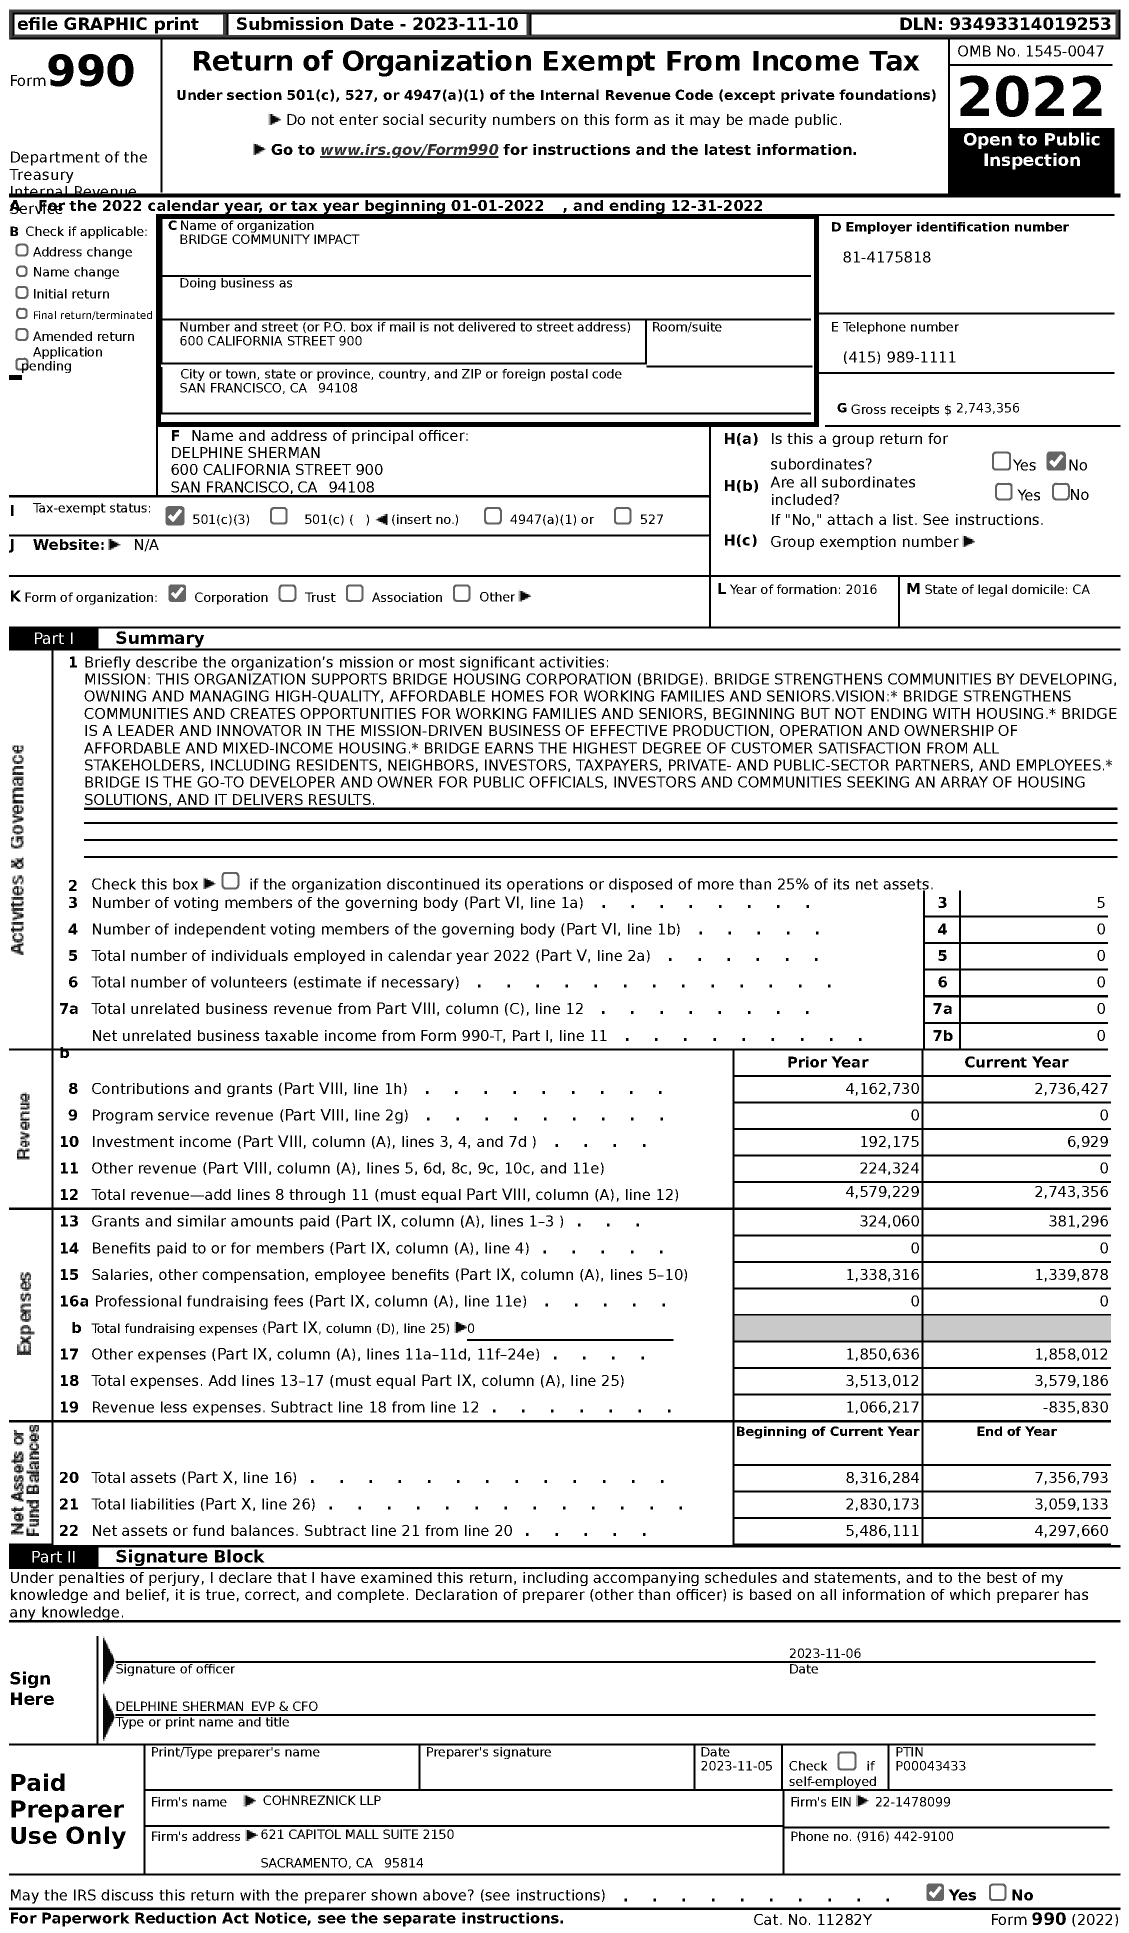 Image of first page of 2022 Form 990 for Bridge Community Impact (BRIC)